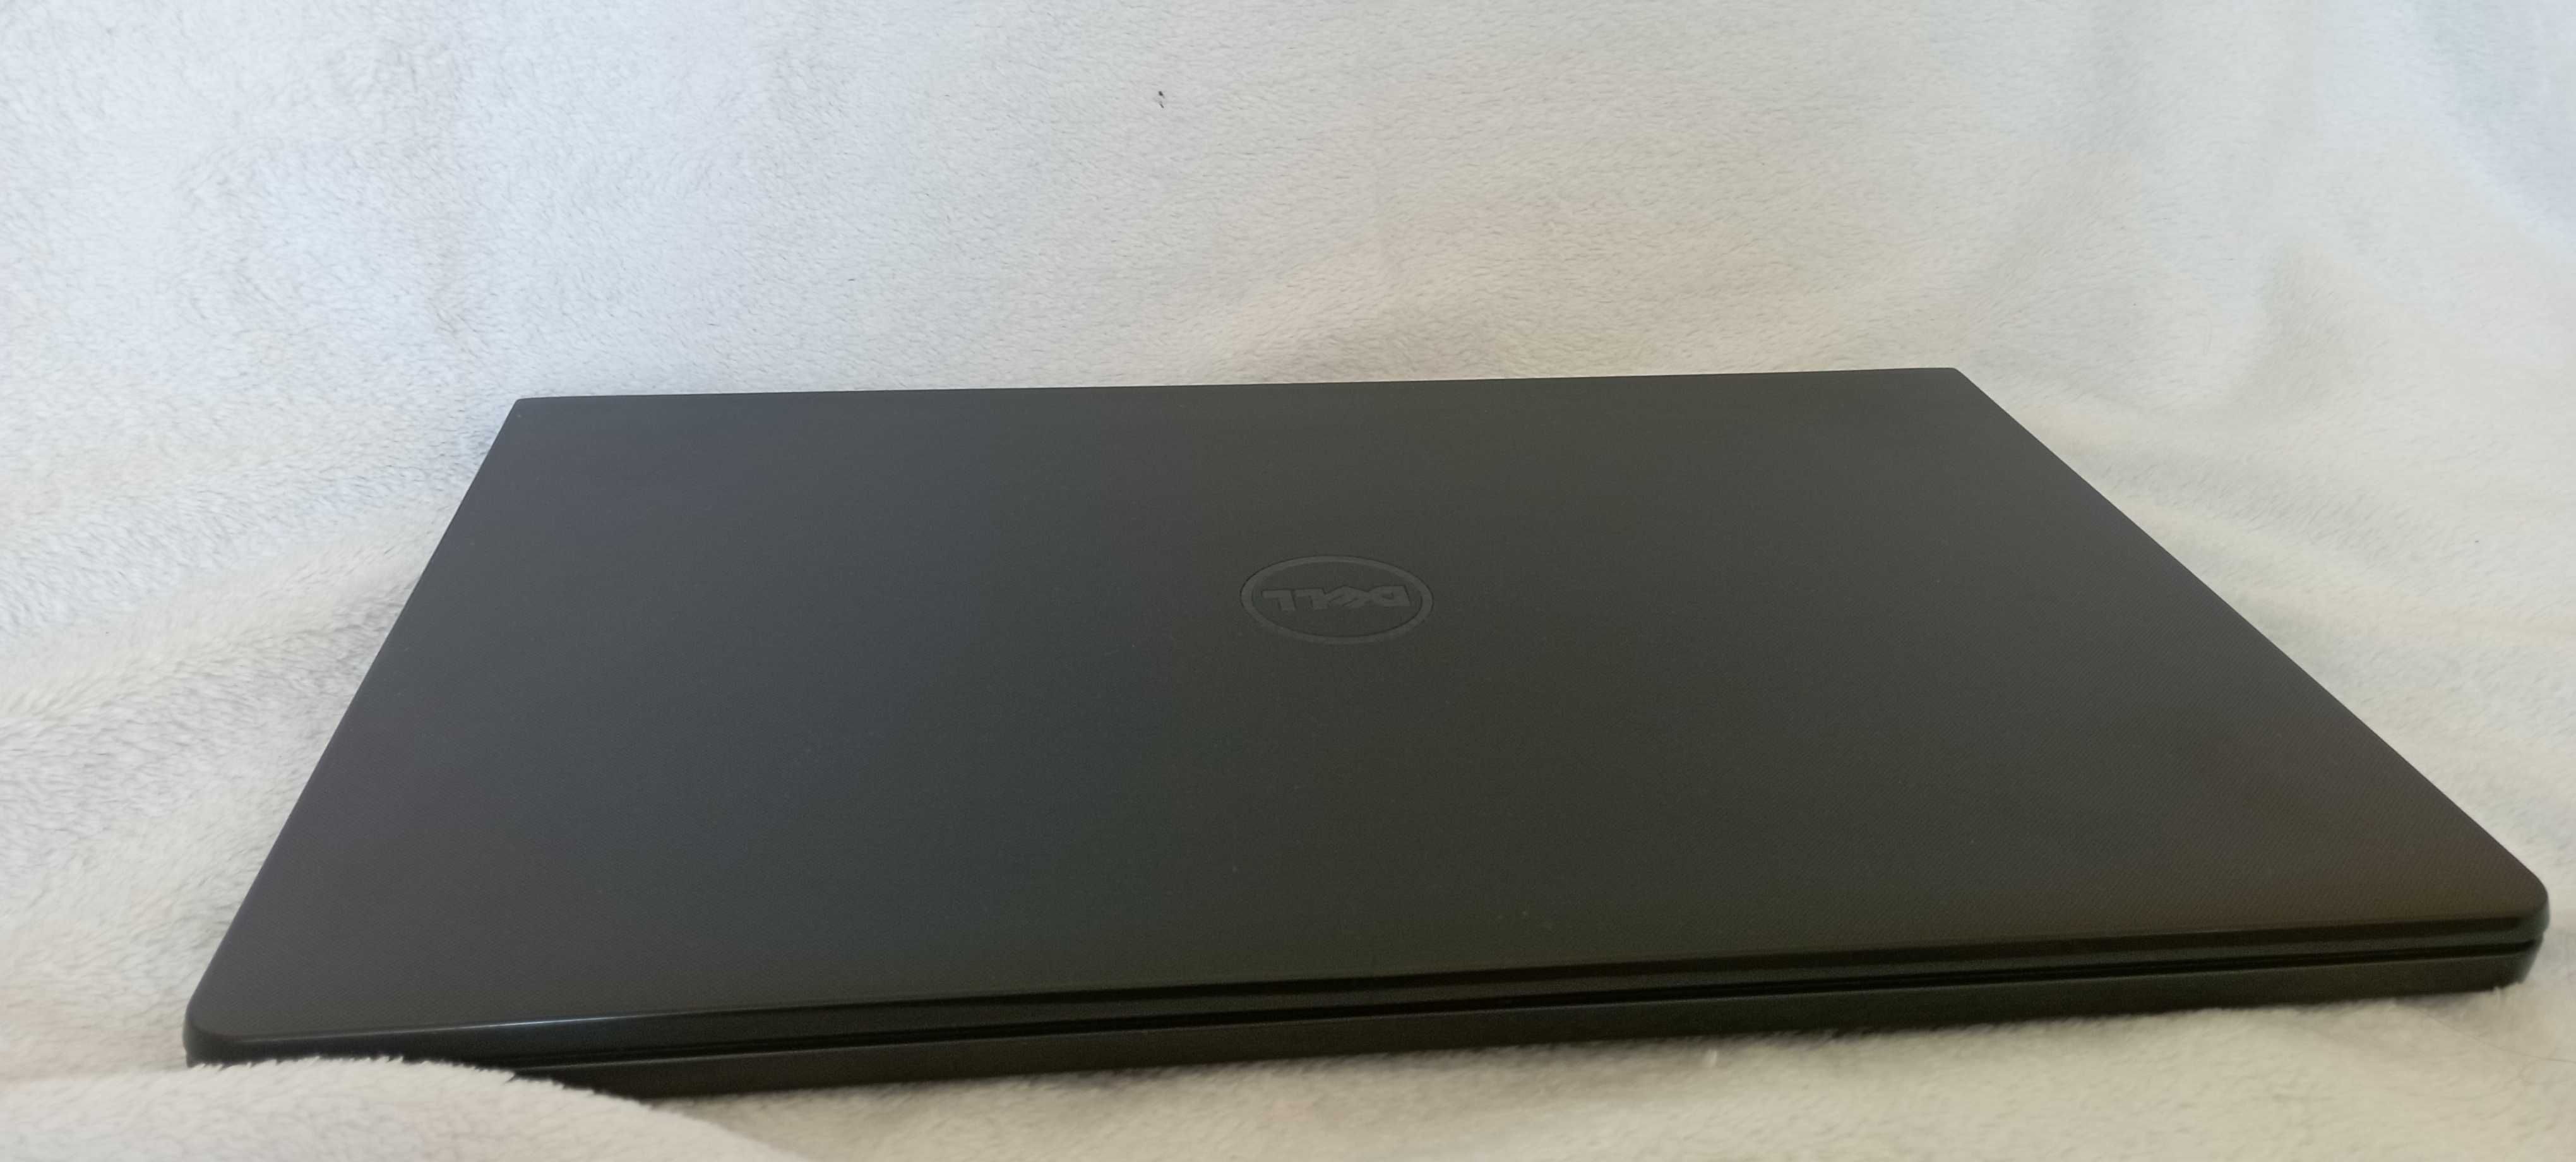 Dell Inspiron 3552 N3710